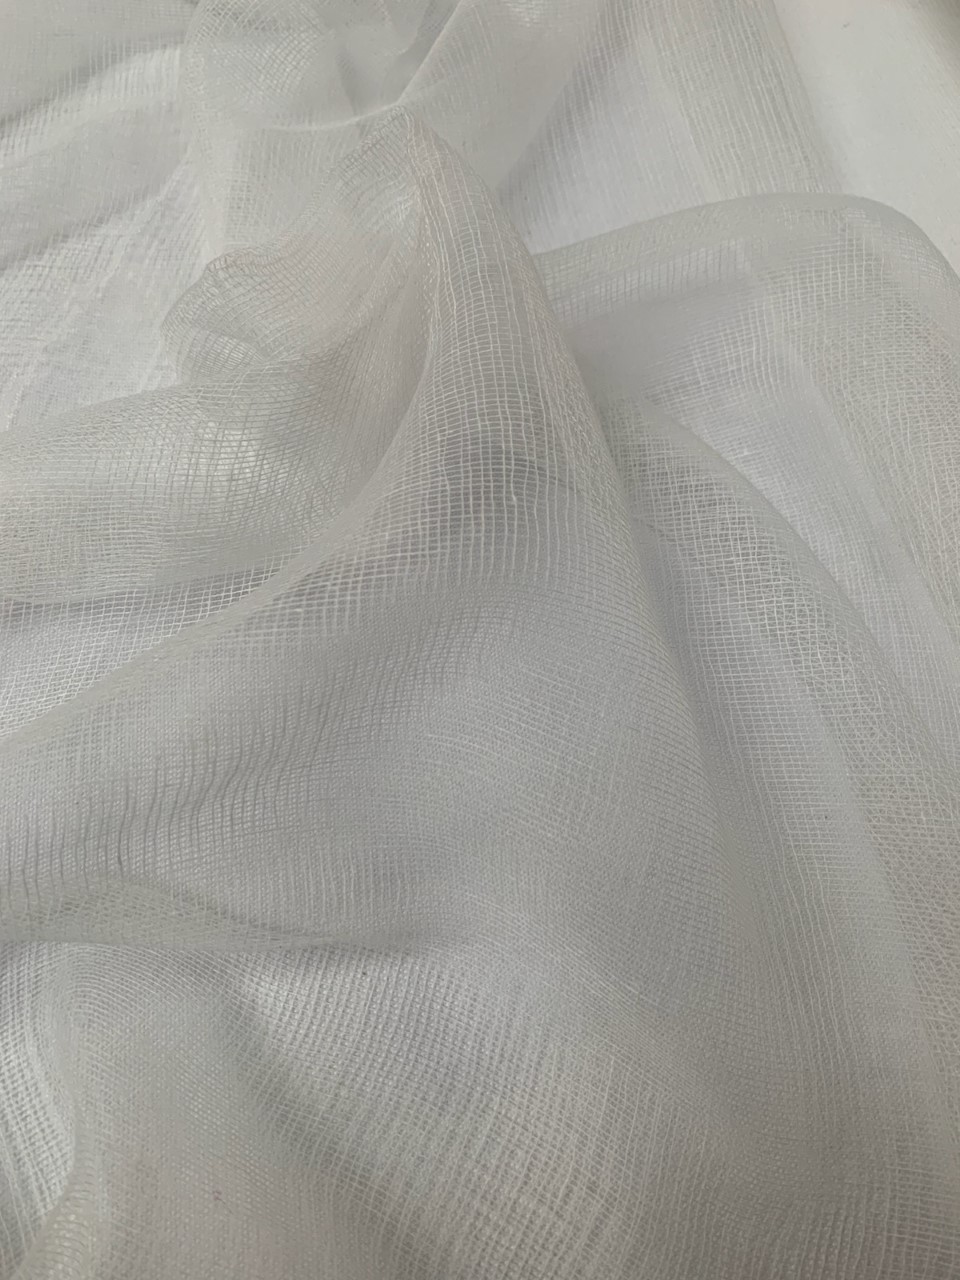 30 Wide Grade 10 Bleached Cheesecloth 1000 Yard Roll